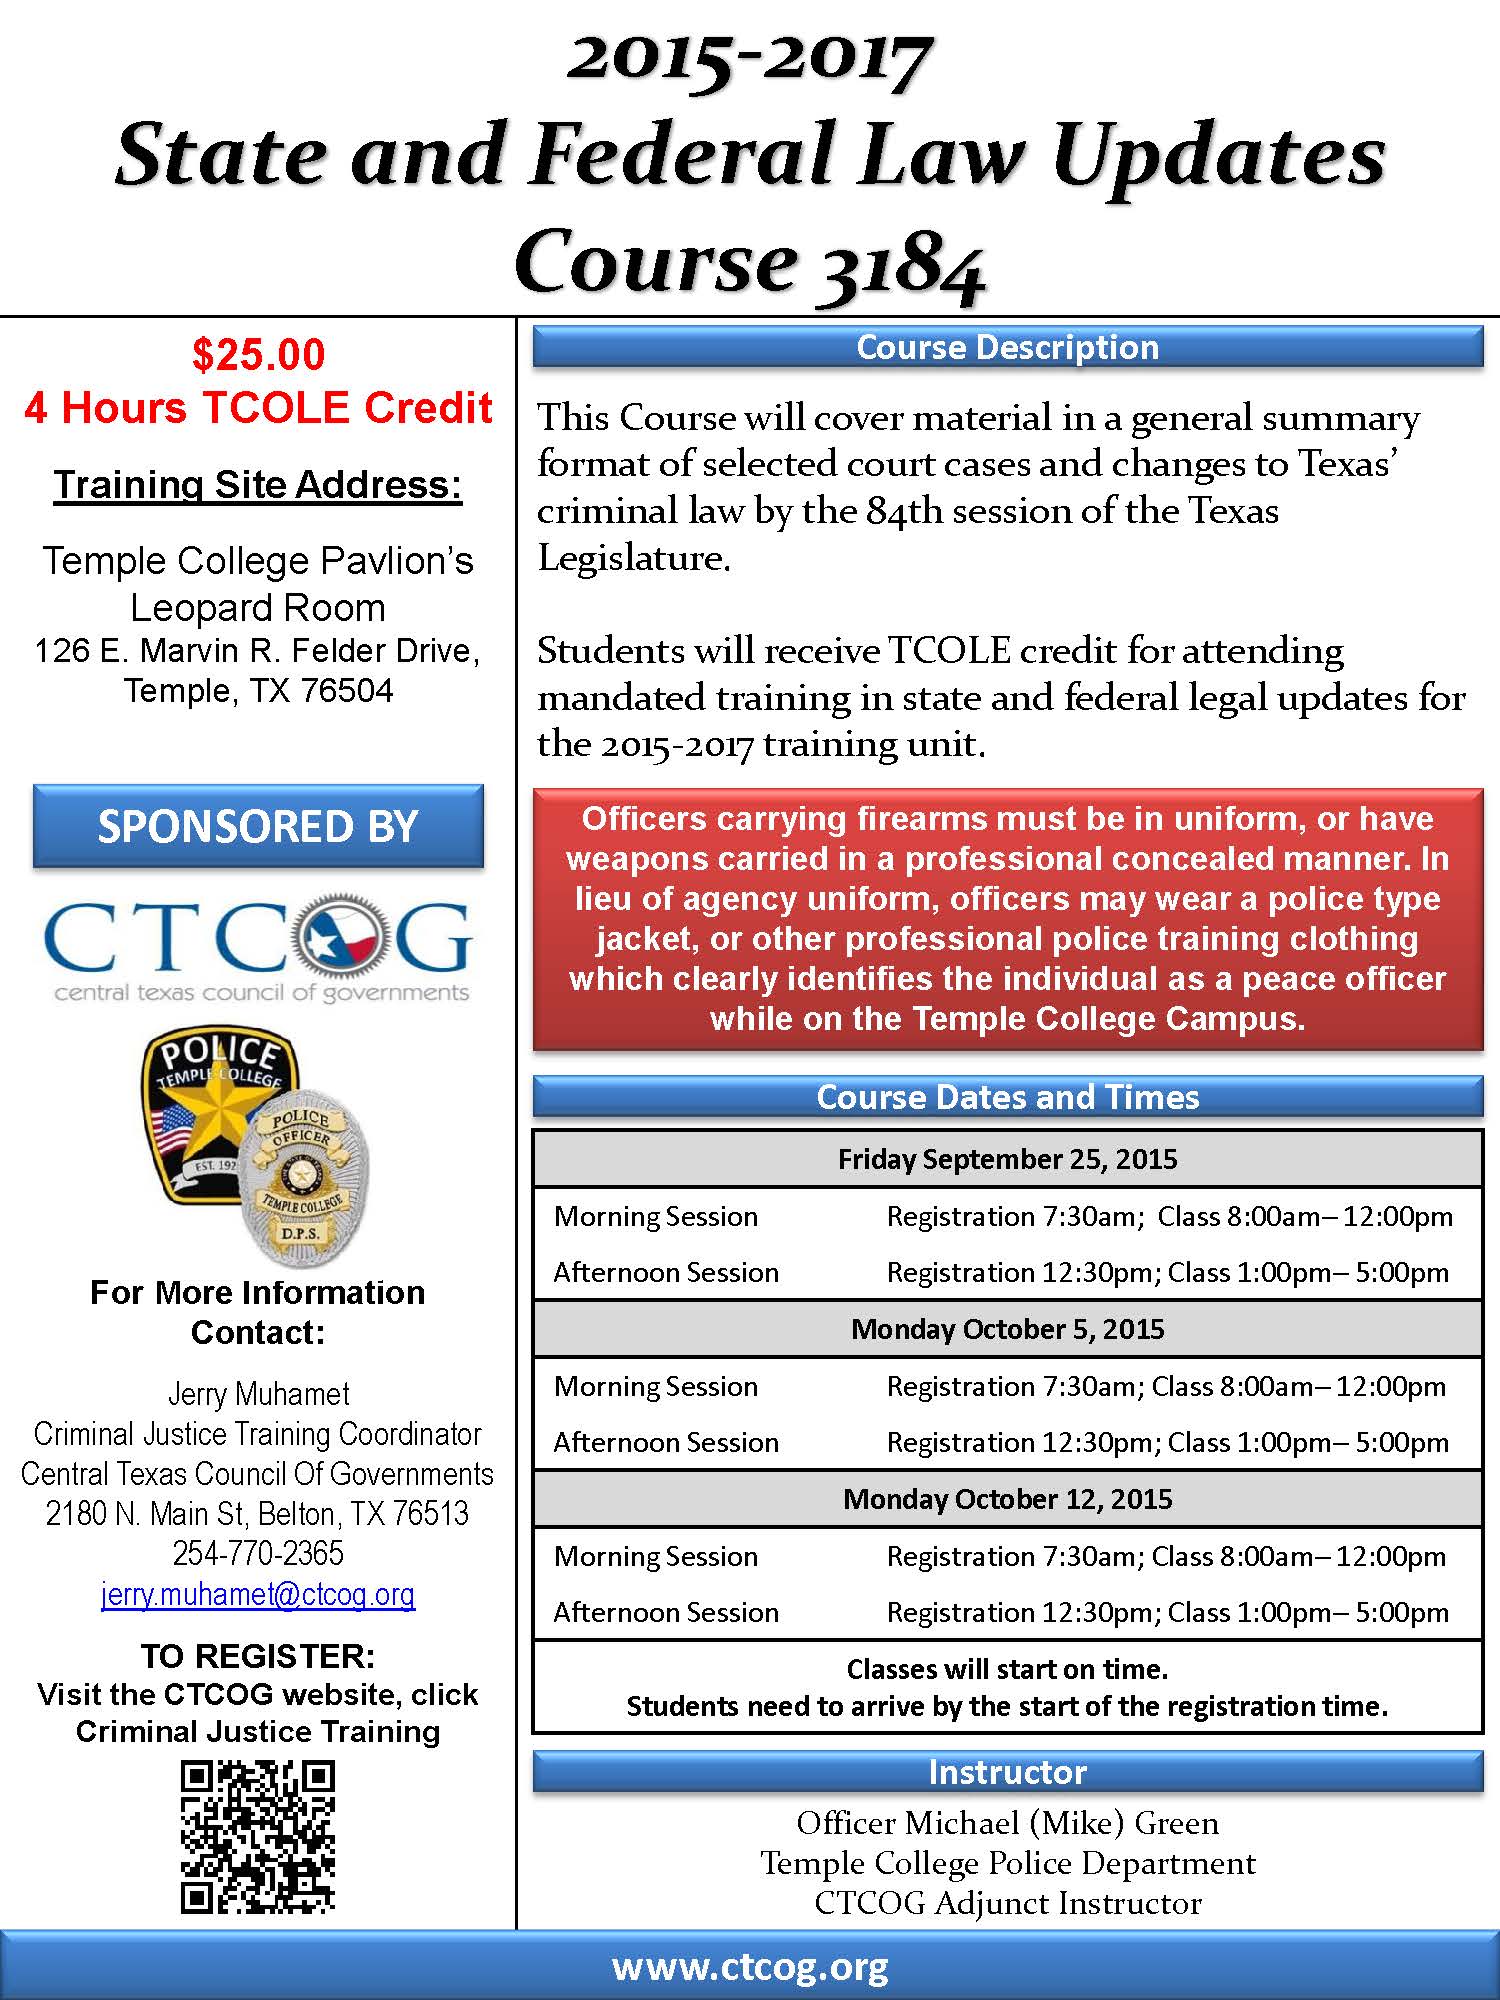 TCOLE Course 3184 Now Open for Registration • Central Texas Council of